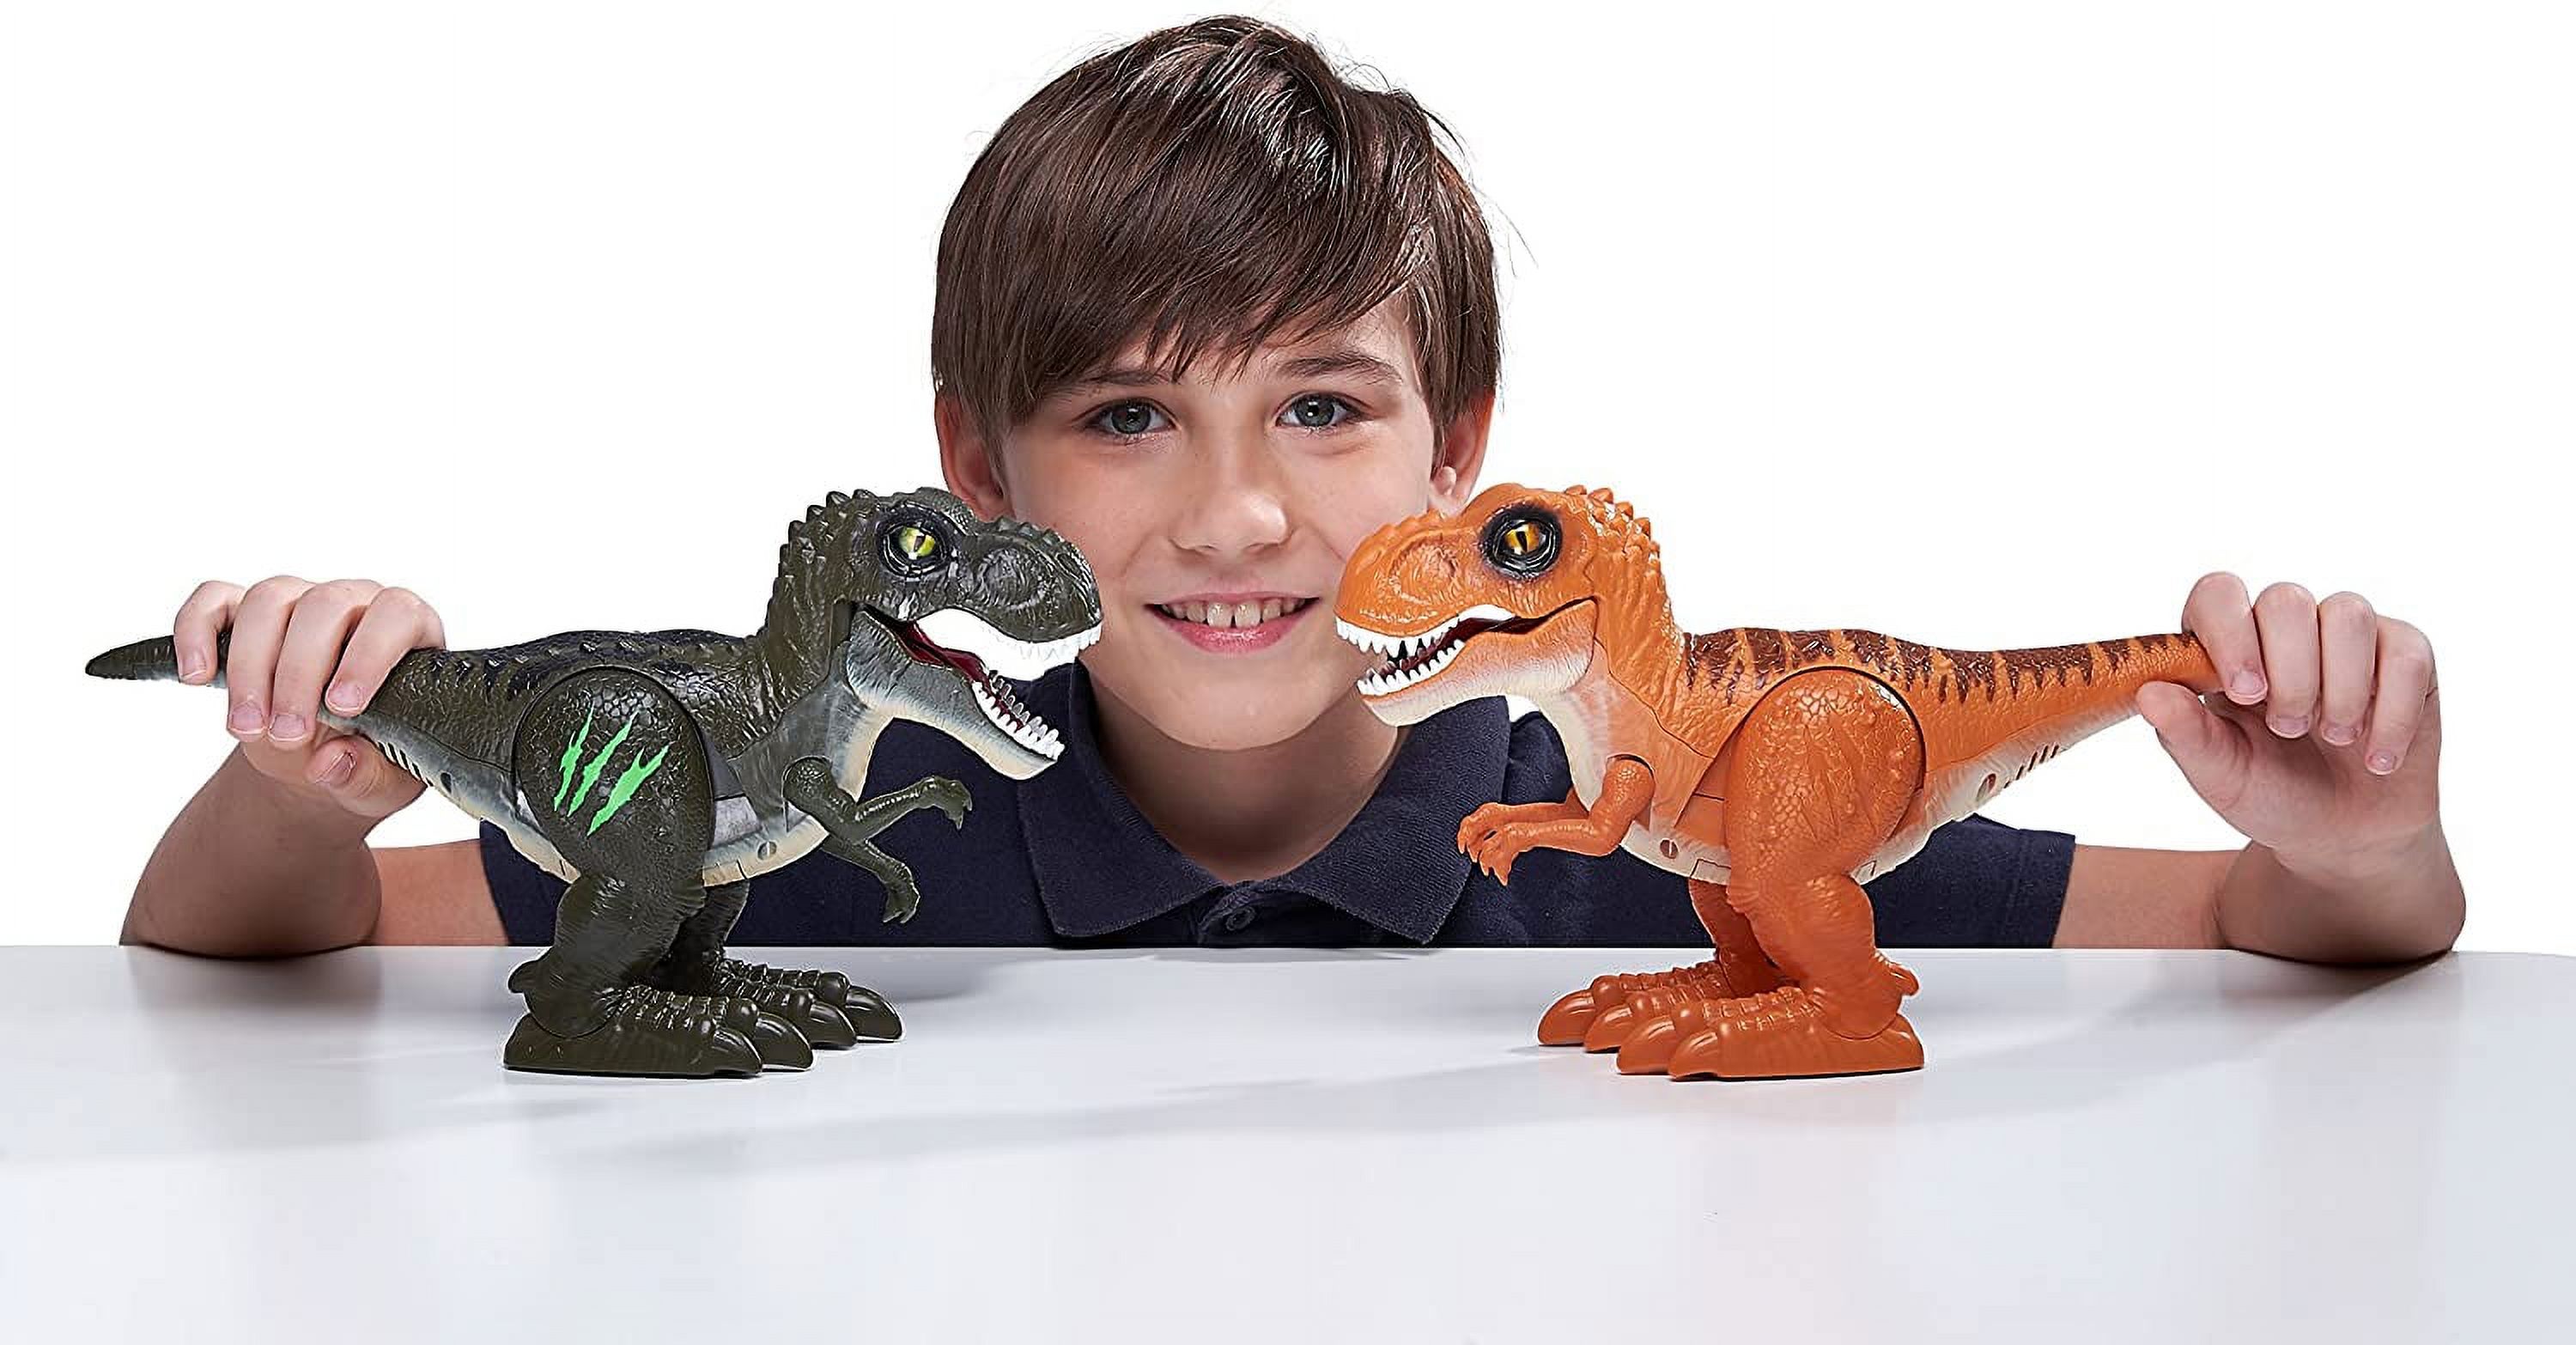 Robo Alive Attacking T-Rex Dinosaur Battery-Powered Robotic Toy by ZURU (Color may vary) - image 4 of 12